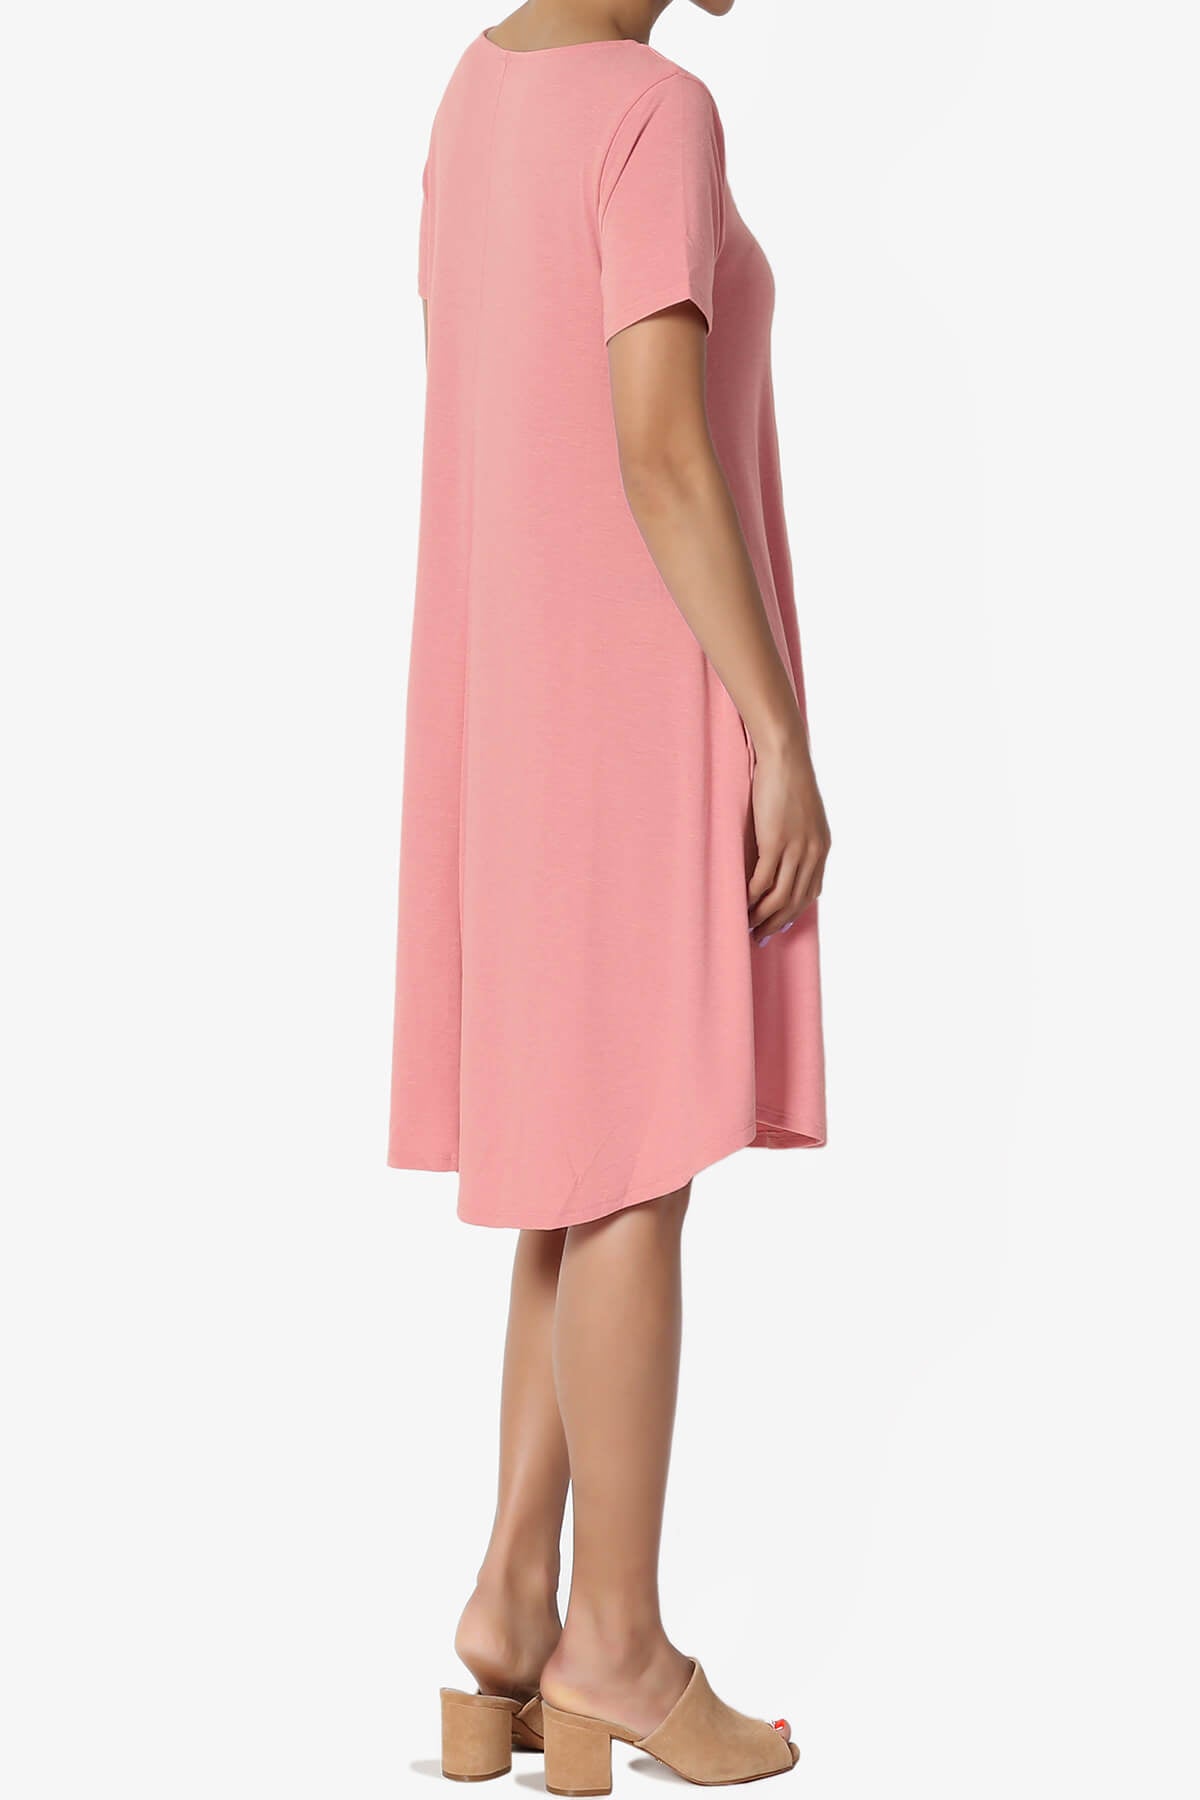 Load image into Gallery viewer, Amella Strappy Scoop Neck Pocket Dress DUSTY ROSE_4
